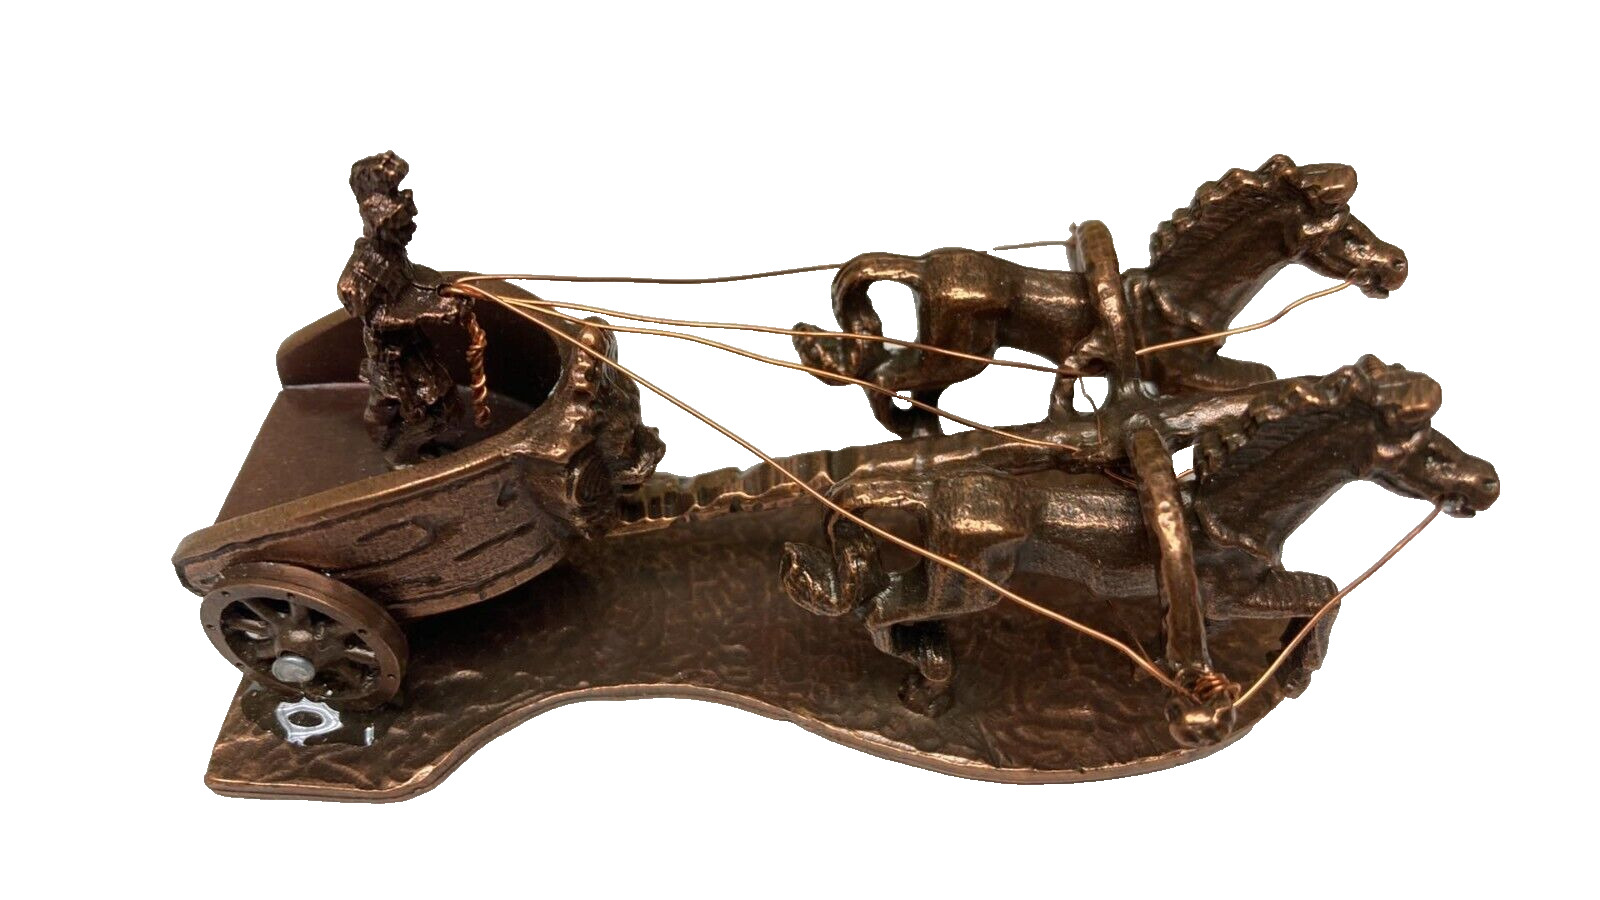 WHOLESALE Roman Chariot Bronzed Miniature Sculpture Metal Figurine Made in Italy